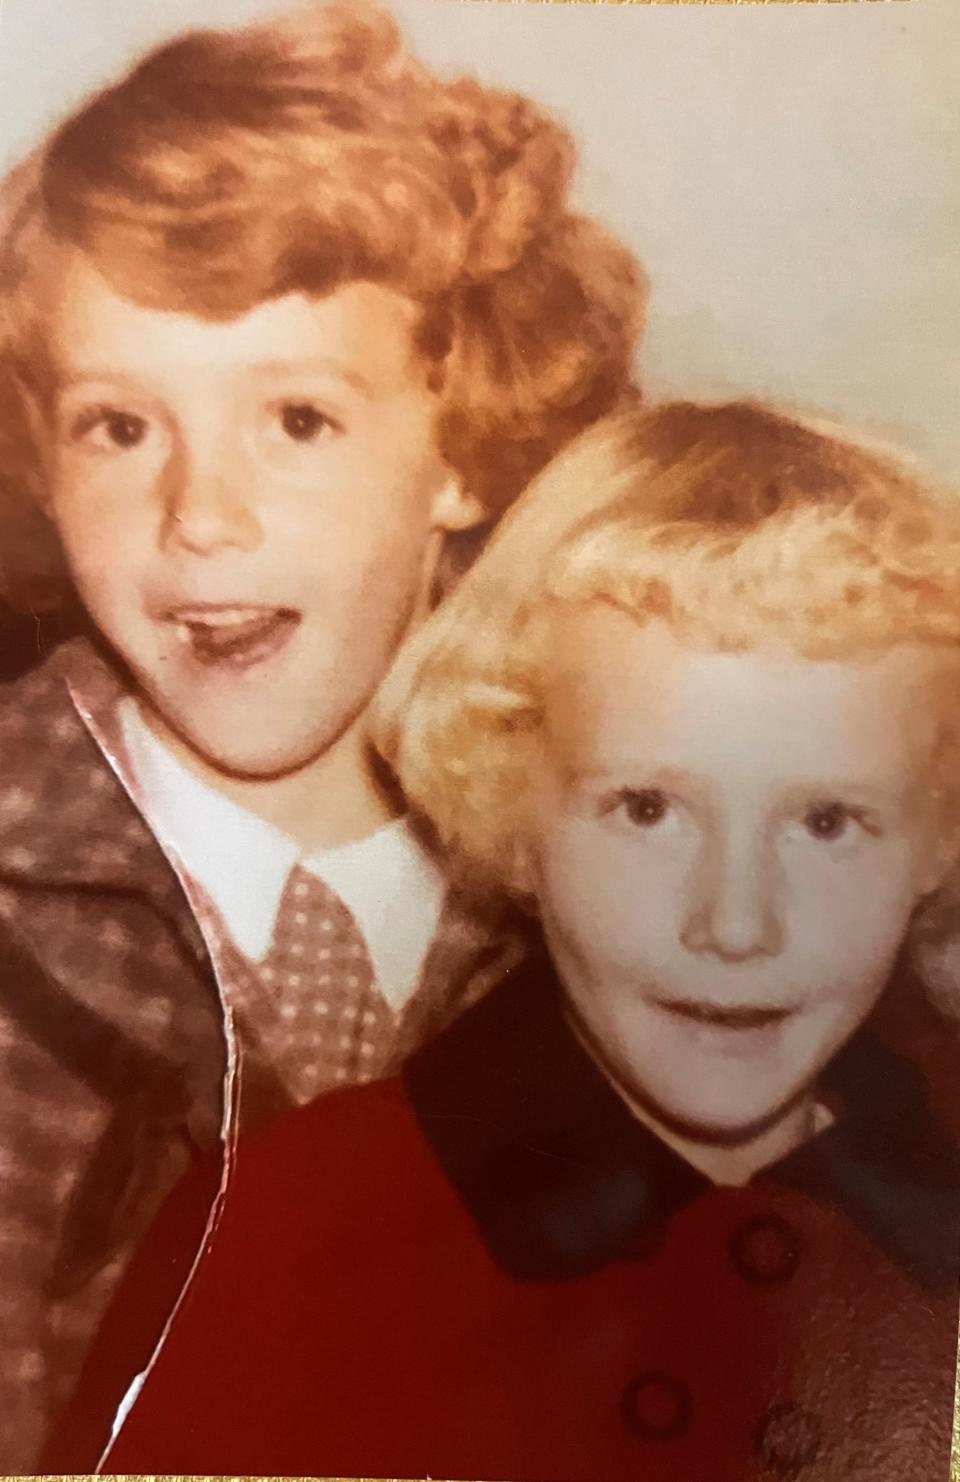 Mary Dickson, right, and her sister Ann about  Christmas 1960 in Salt Lake City. Ann died in 2001 after a nine-year battle with an autoimmune disease. Mary has been diagnosed with thyroid cancer.